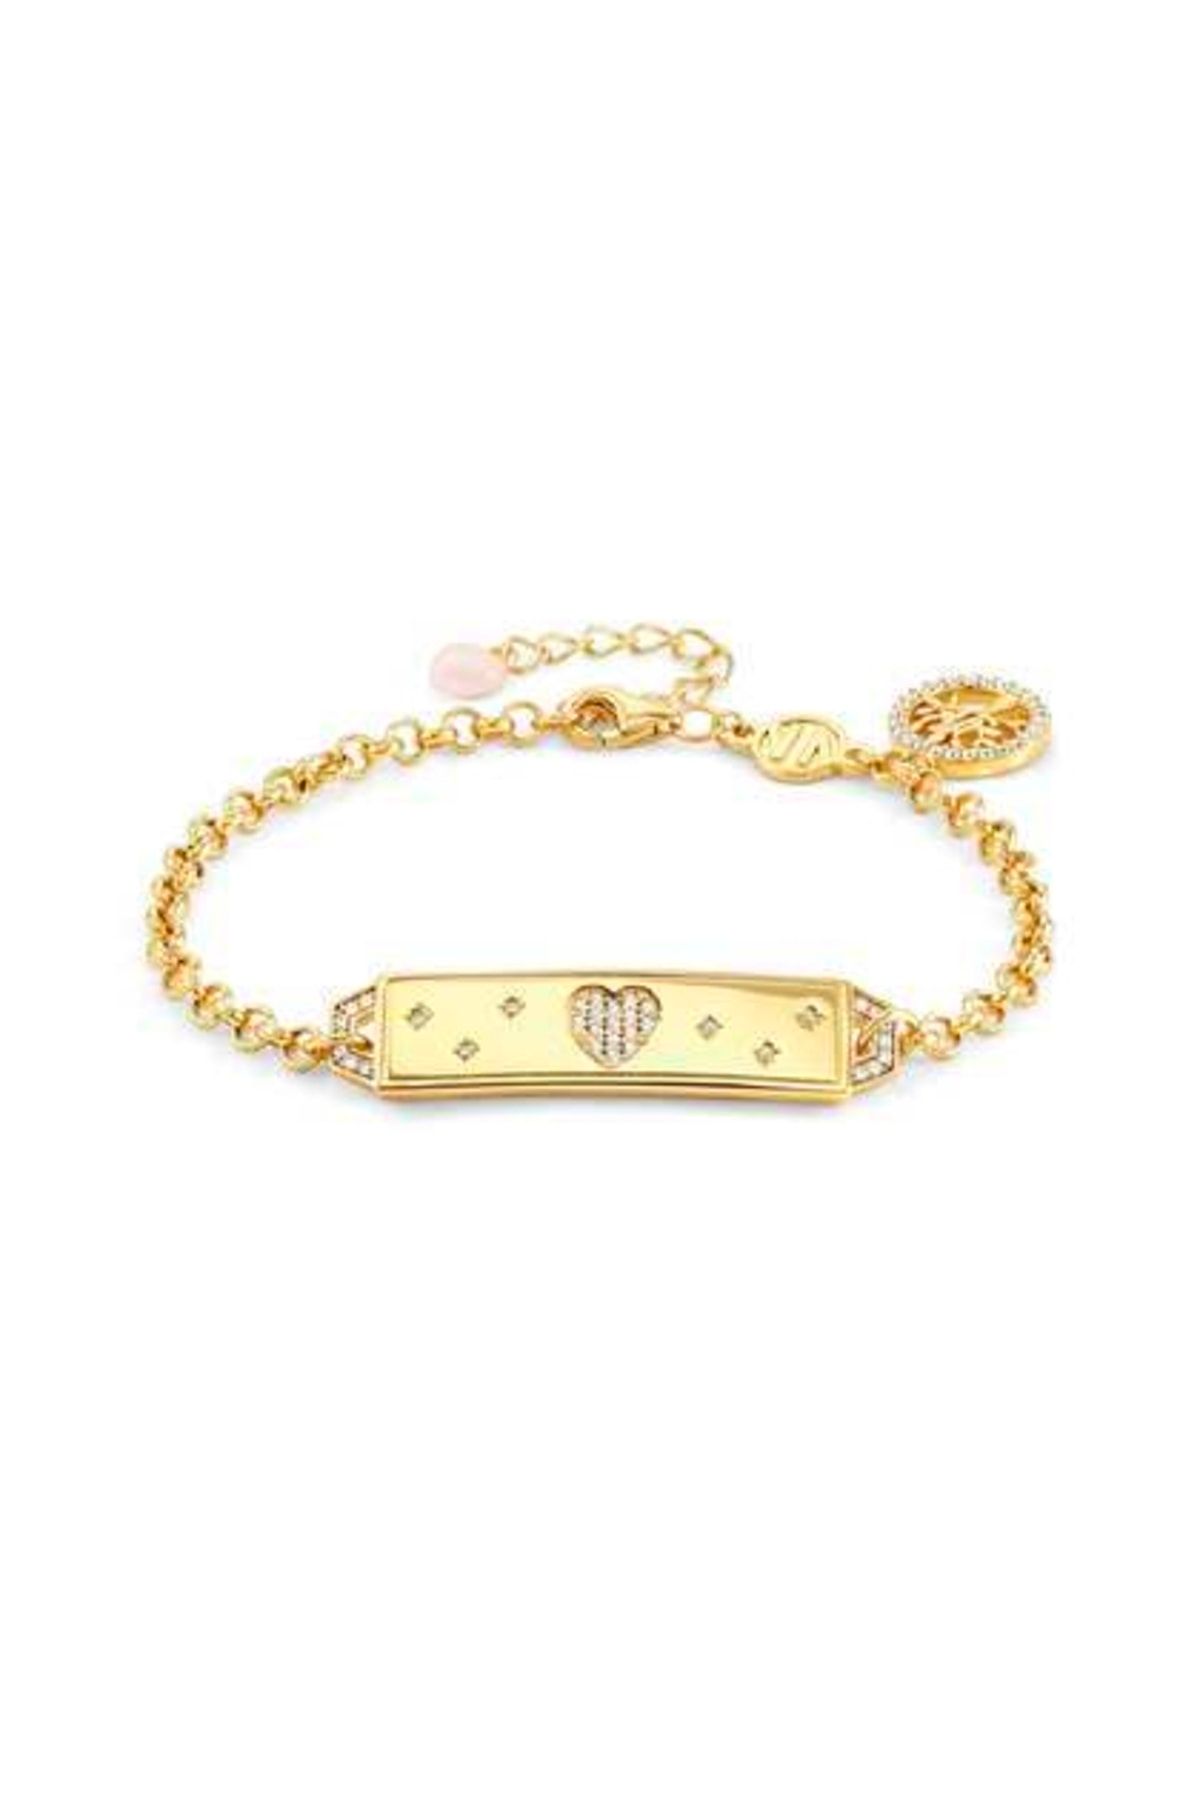 NOMİNATİON Talısmanı Bracelet In 925 Silver, Cz And Yellow Gold Stones (021_let There Be Love ,,,)